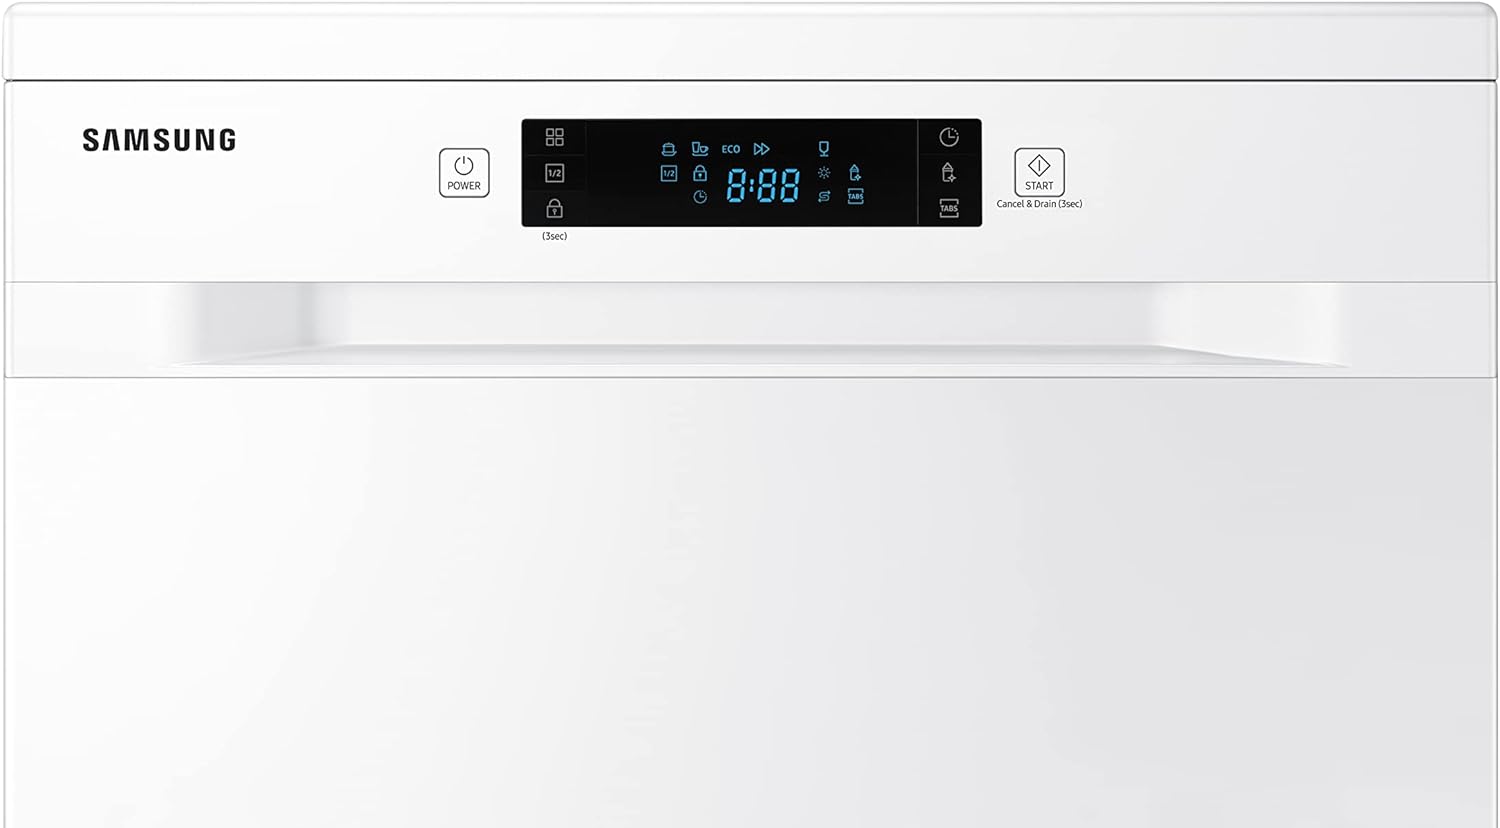 Samsung DW60M5050FW/EU Series 5 Dishwasher, Freestanding, Full Size, 13 Place Settings White - Amazing Gadgets Outlet